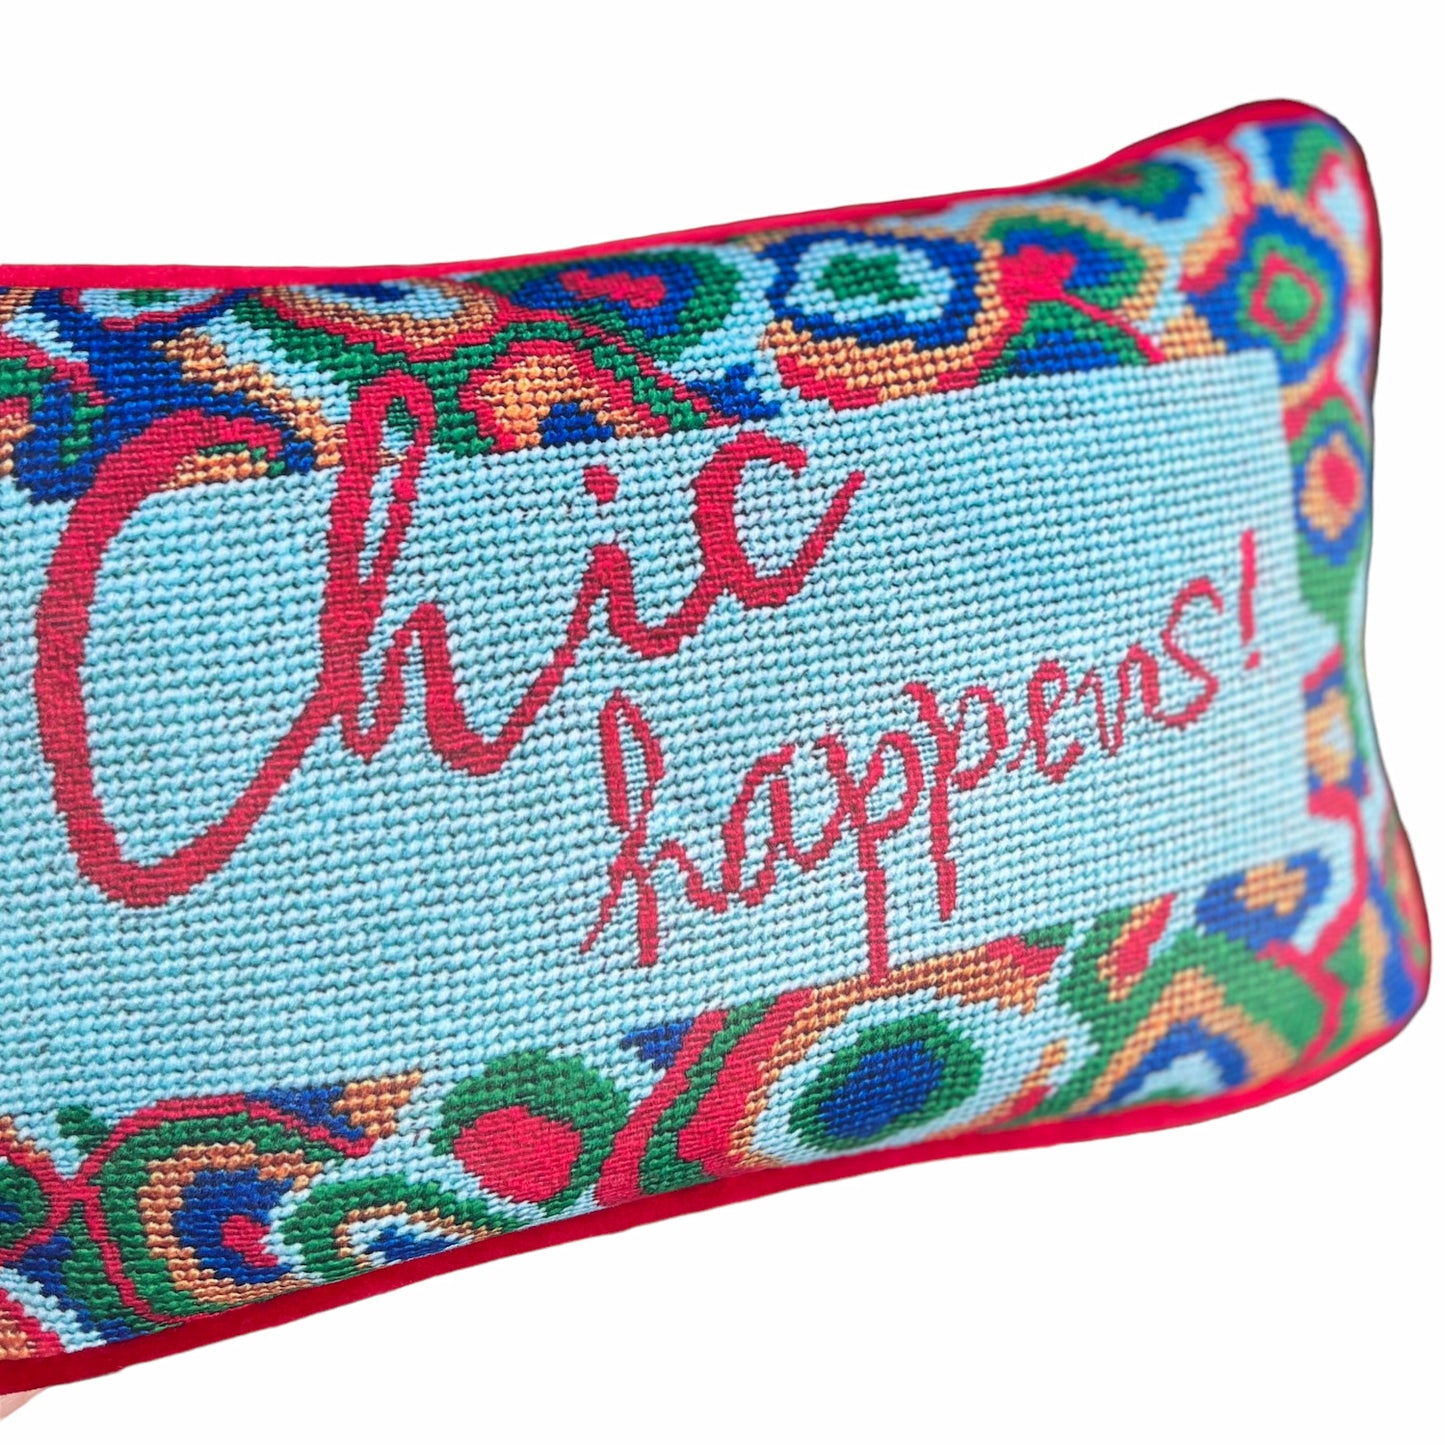 designer velvet pillow reads "Chic Happens" in red on Tiffany blue background with colorful red, green and blue  large paisley border